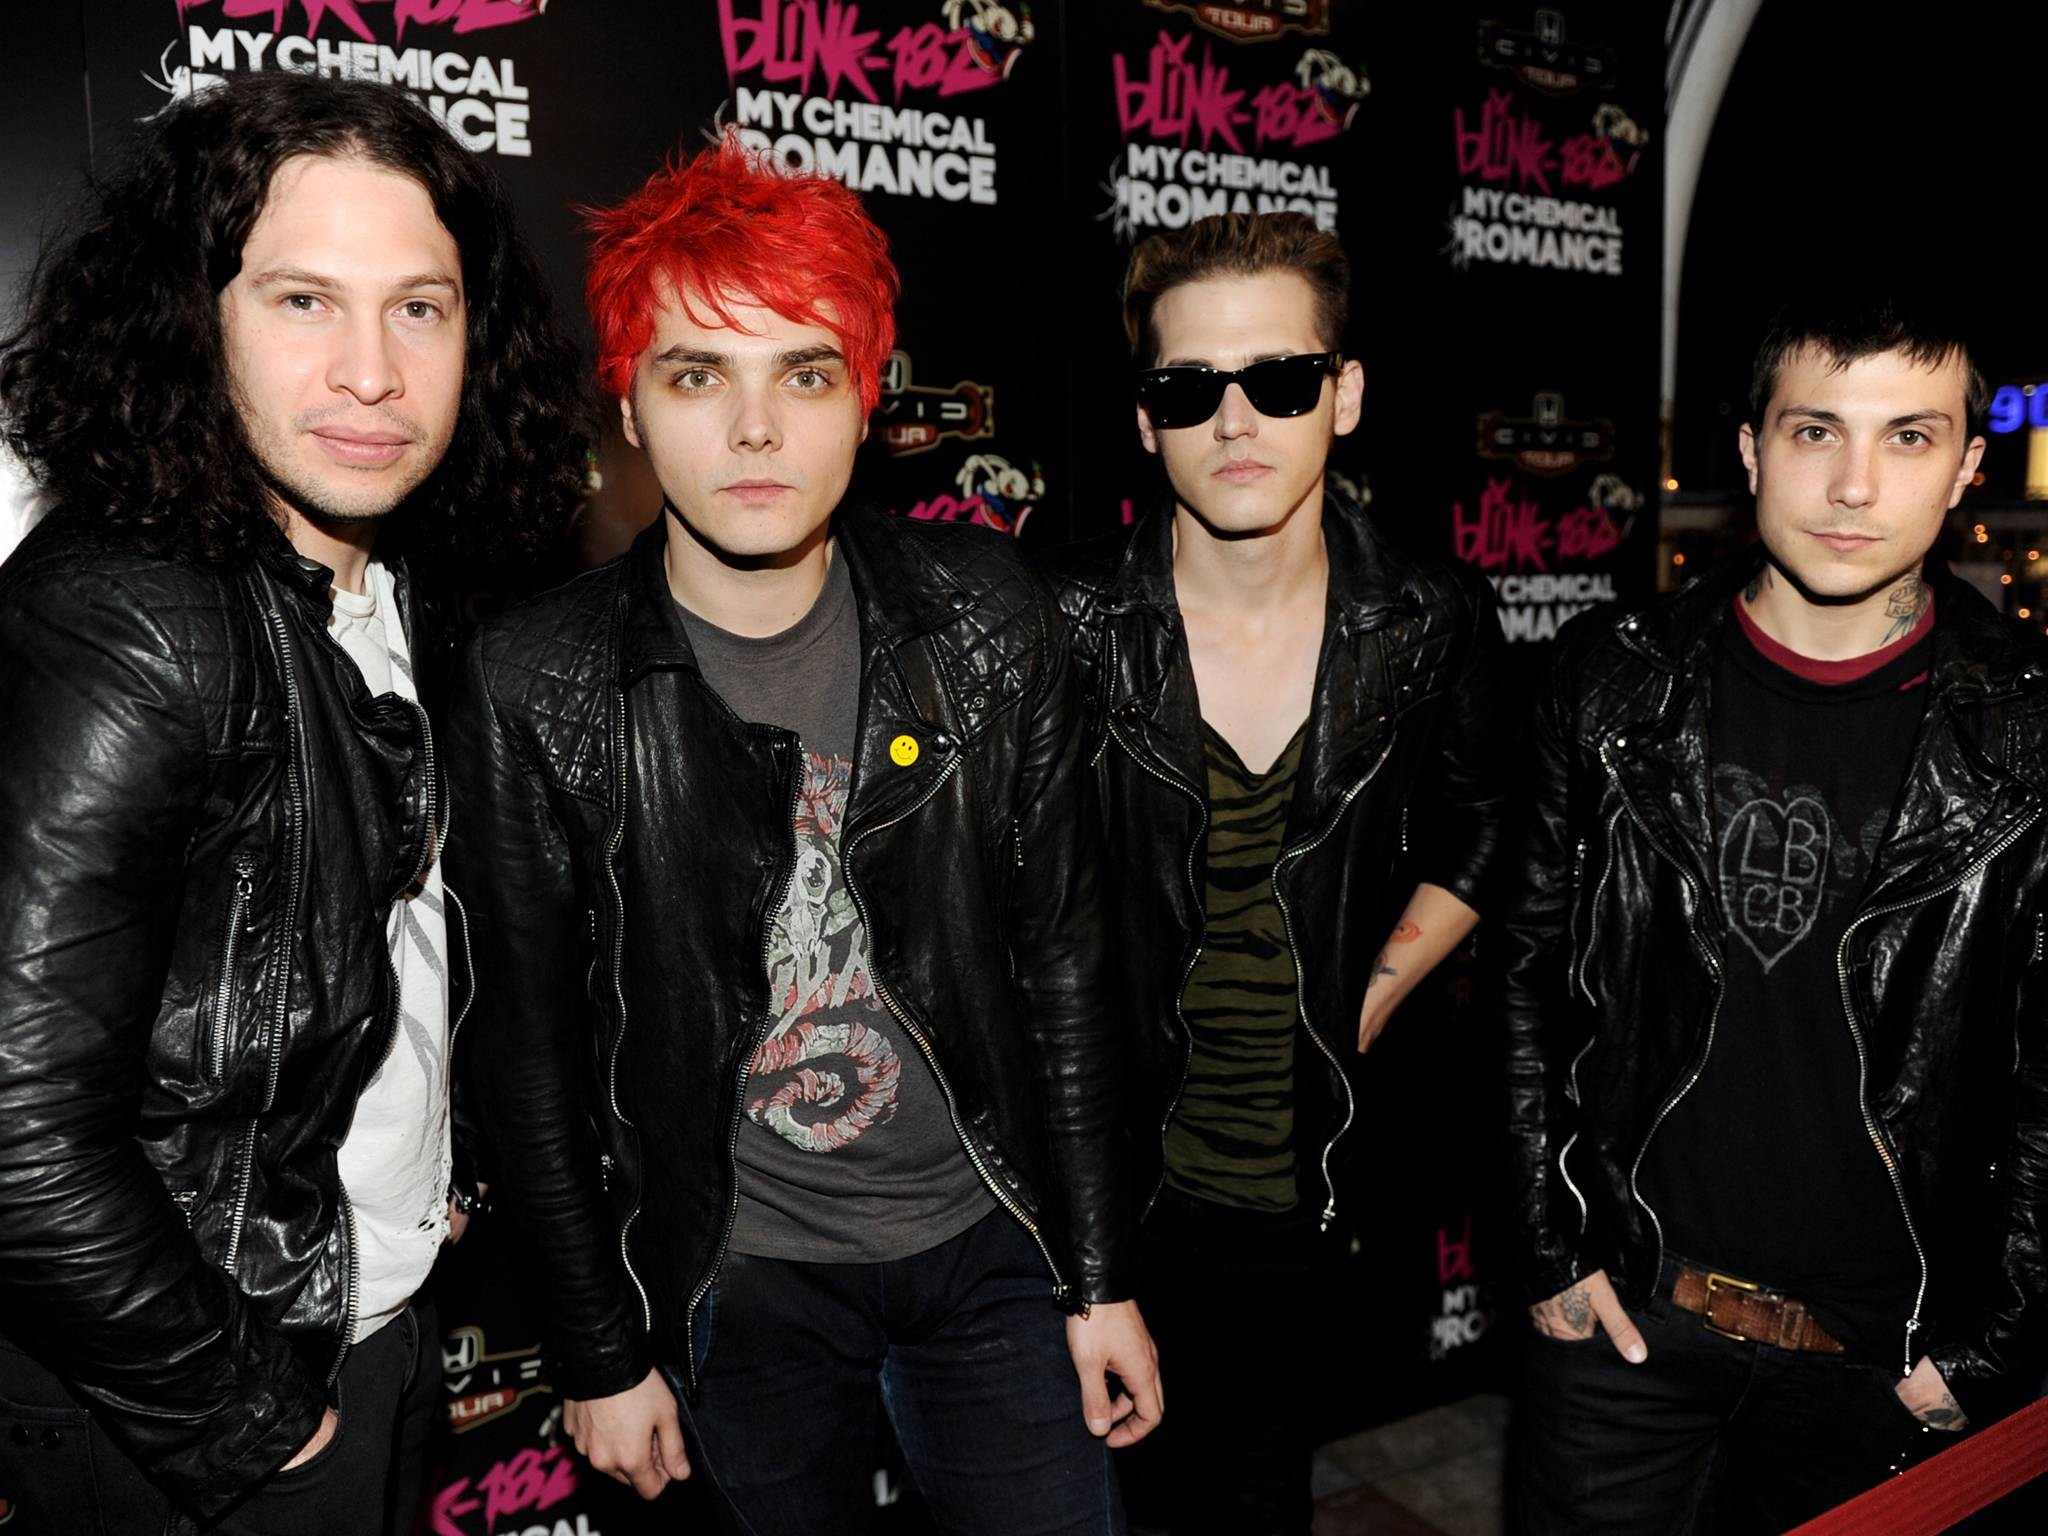 2048x1536 149 best My Chemical Romance images on Pinterest | Emo bands, Music bands  and Killjoys